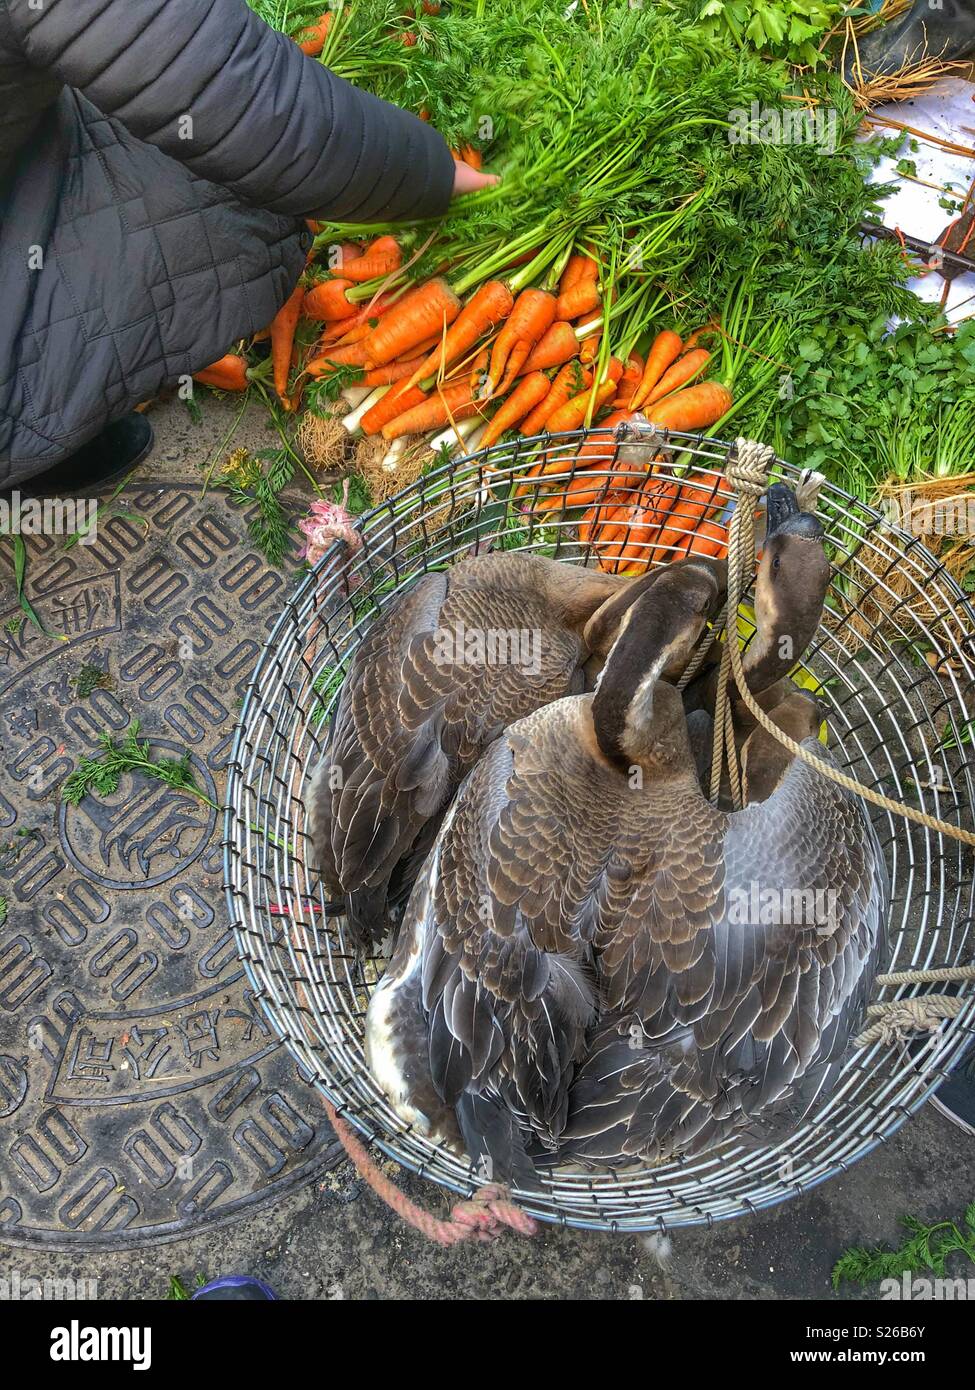 Ducks and carrots sold side by side at an outdoor market in Shaoguan, China. Stock Photo